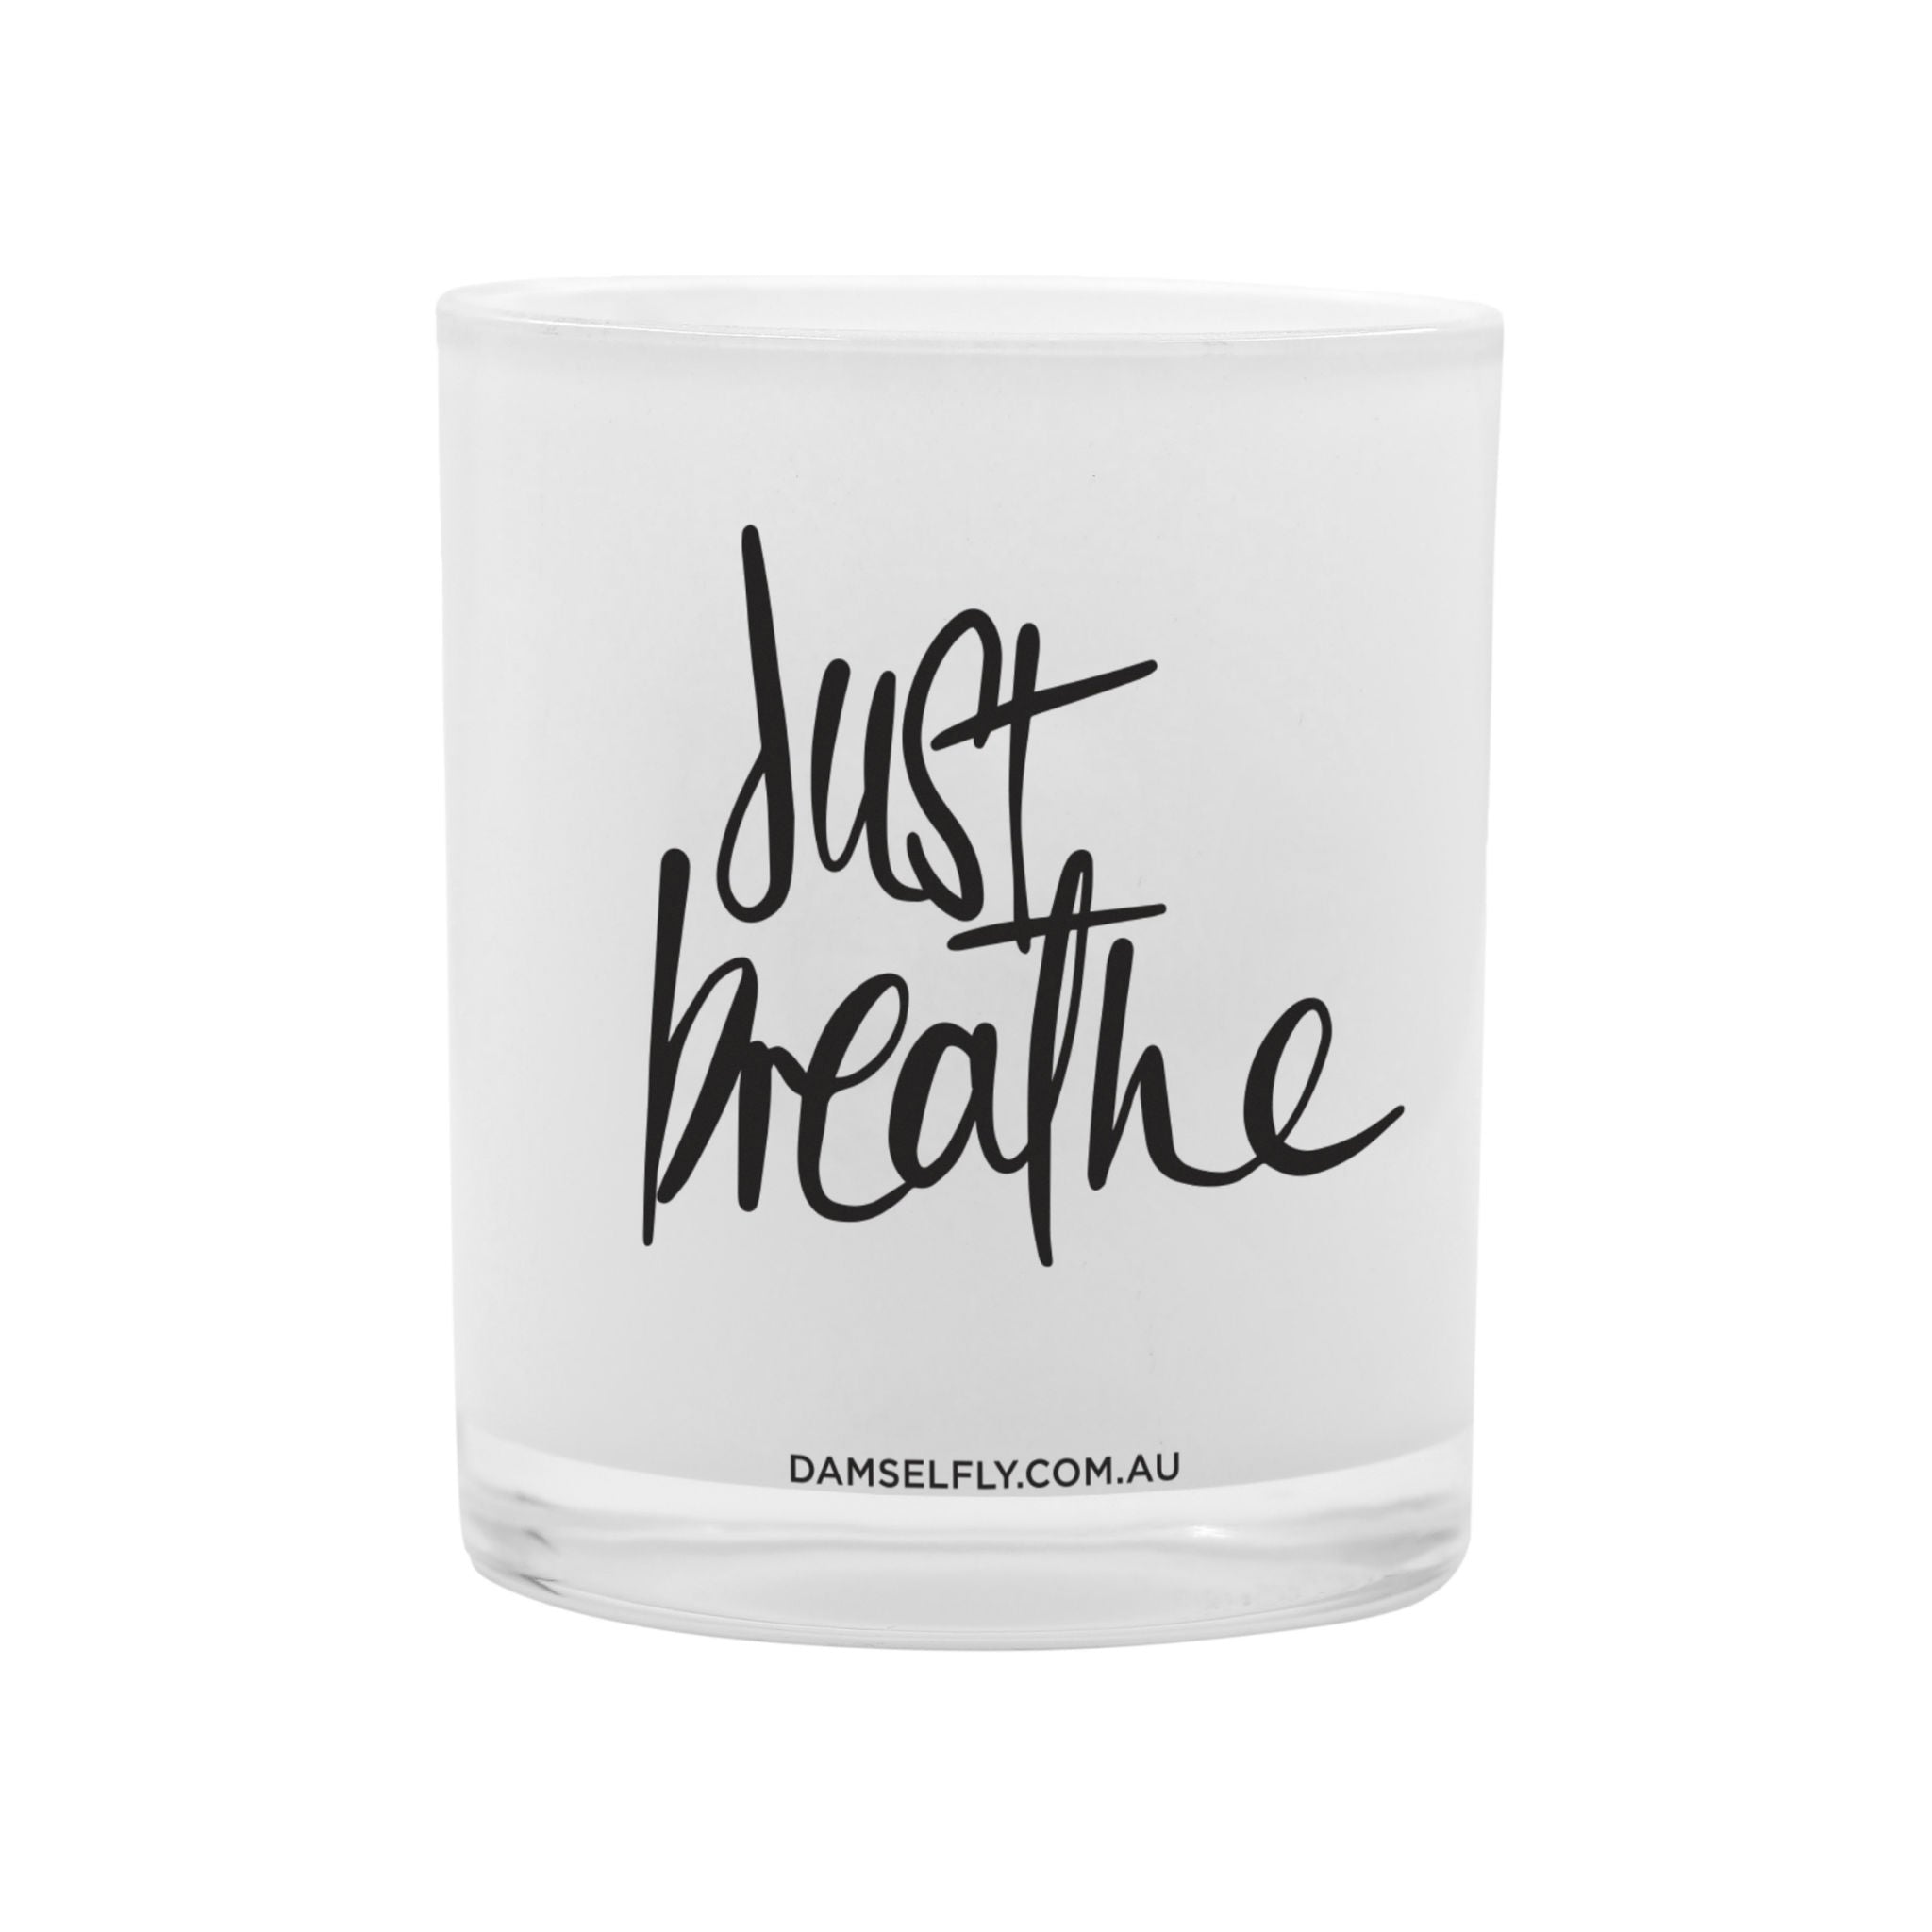 Just Breathe - LRG, Scented Candle, DAMSELFLY-VONMEL Luxe Gifts